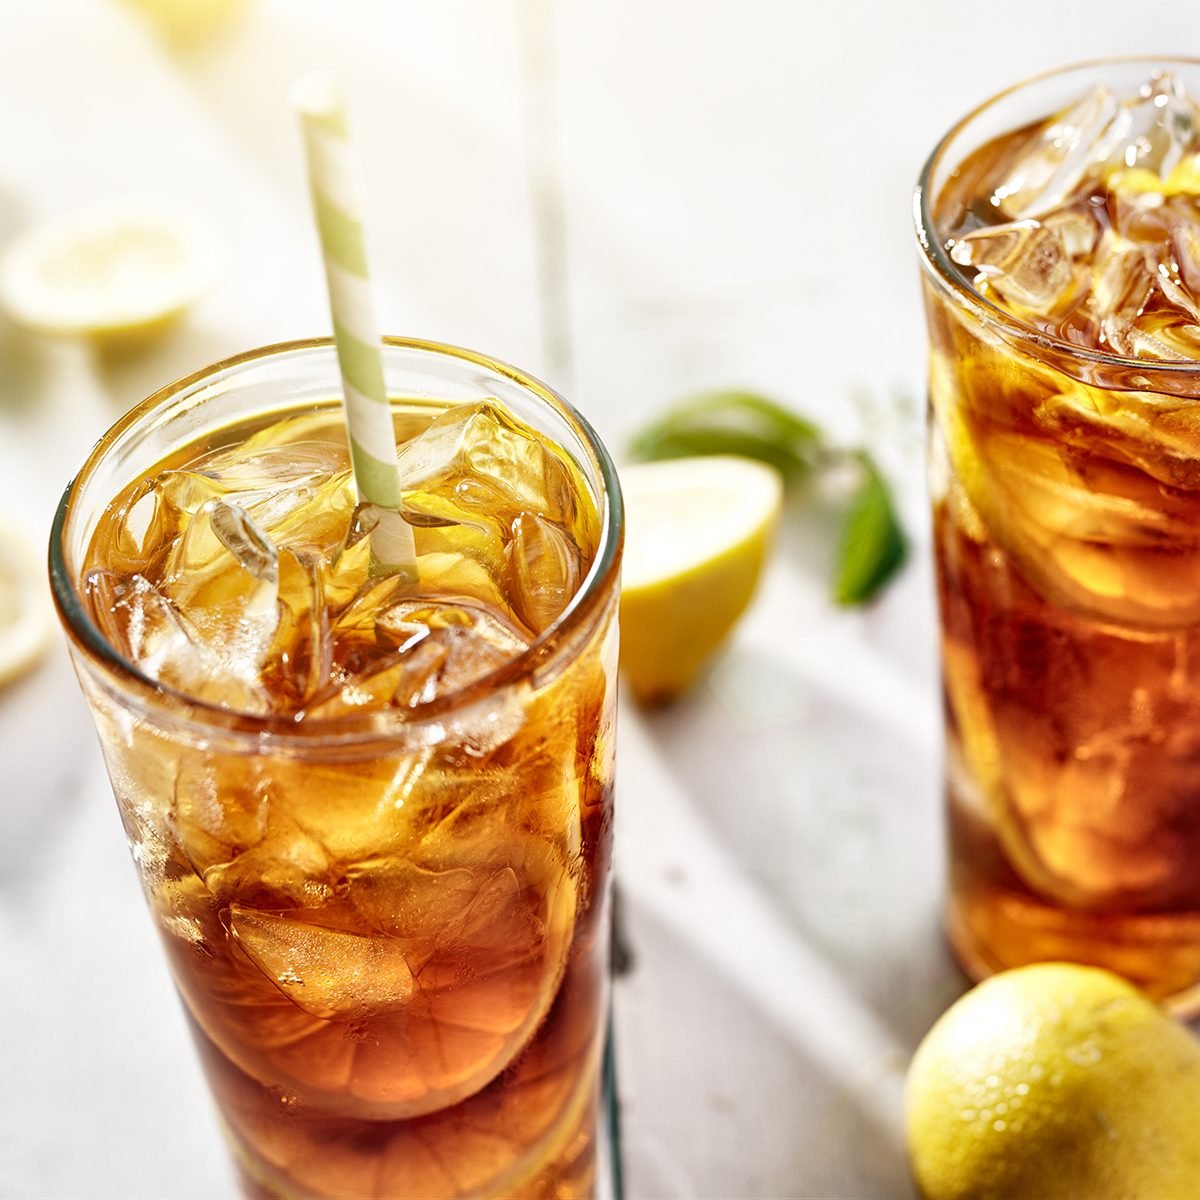 cold iced tea with straws and lemon slices in summer sun.; Shutterstock ID 112400303; Job (TFH, TOH, RD, BNB, CWM, CM): Taste of Home